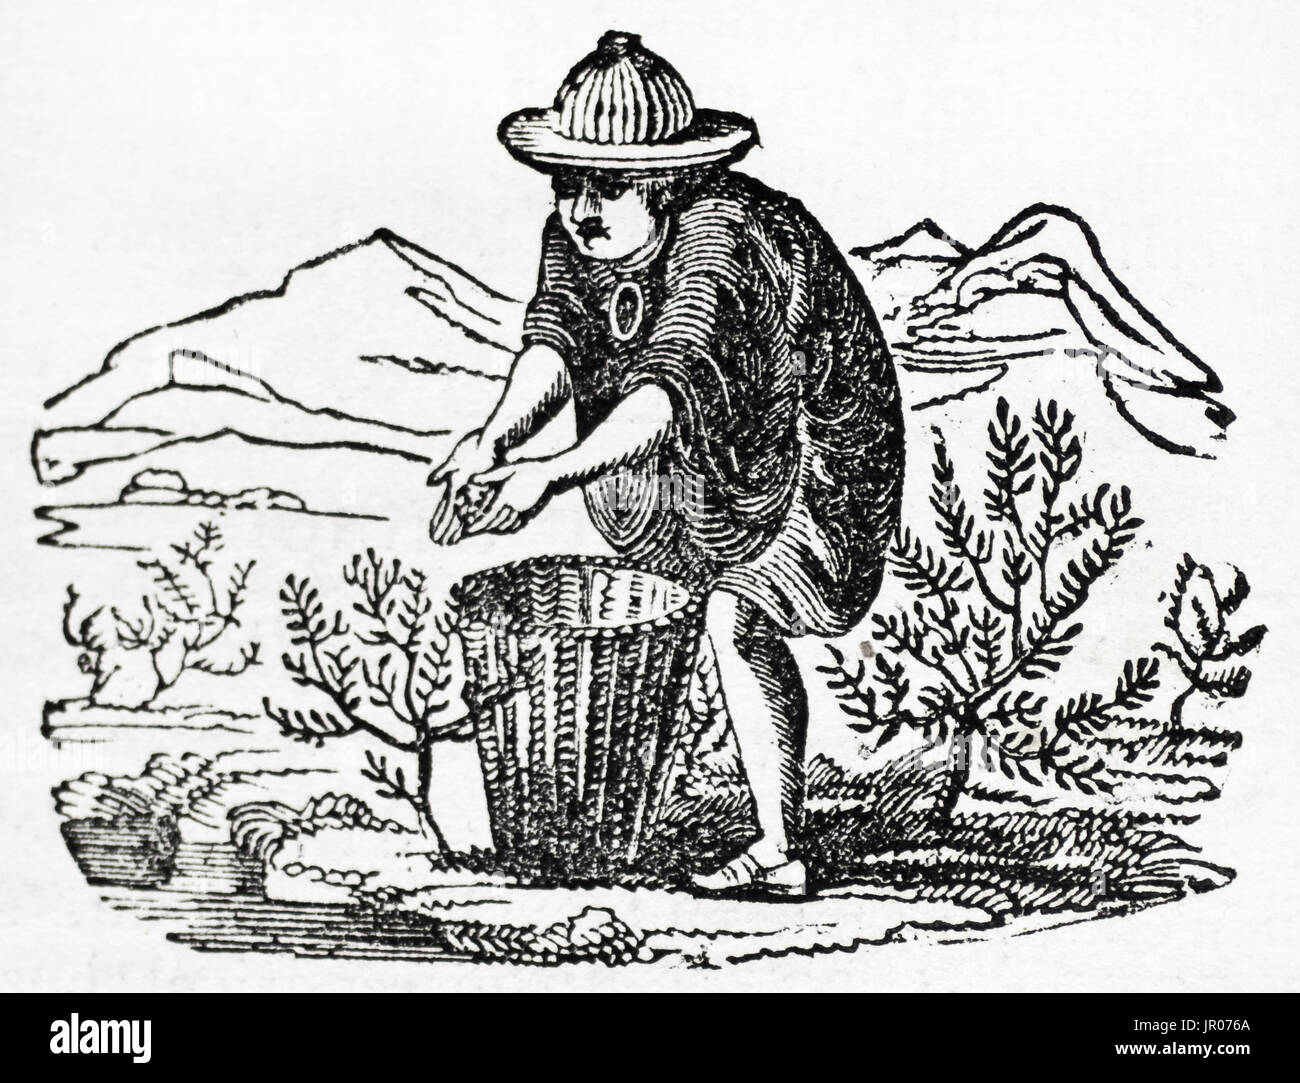 Old illustration of a man harvesting tea leaves. By unidentified author, published on Magasin Pittoresque, Paris, 1833. Stock Photo